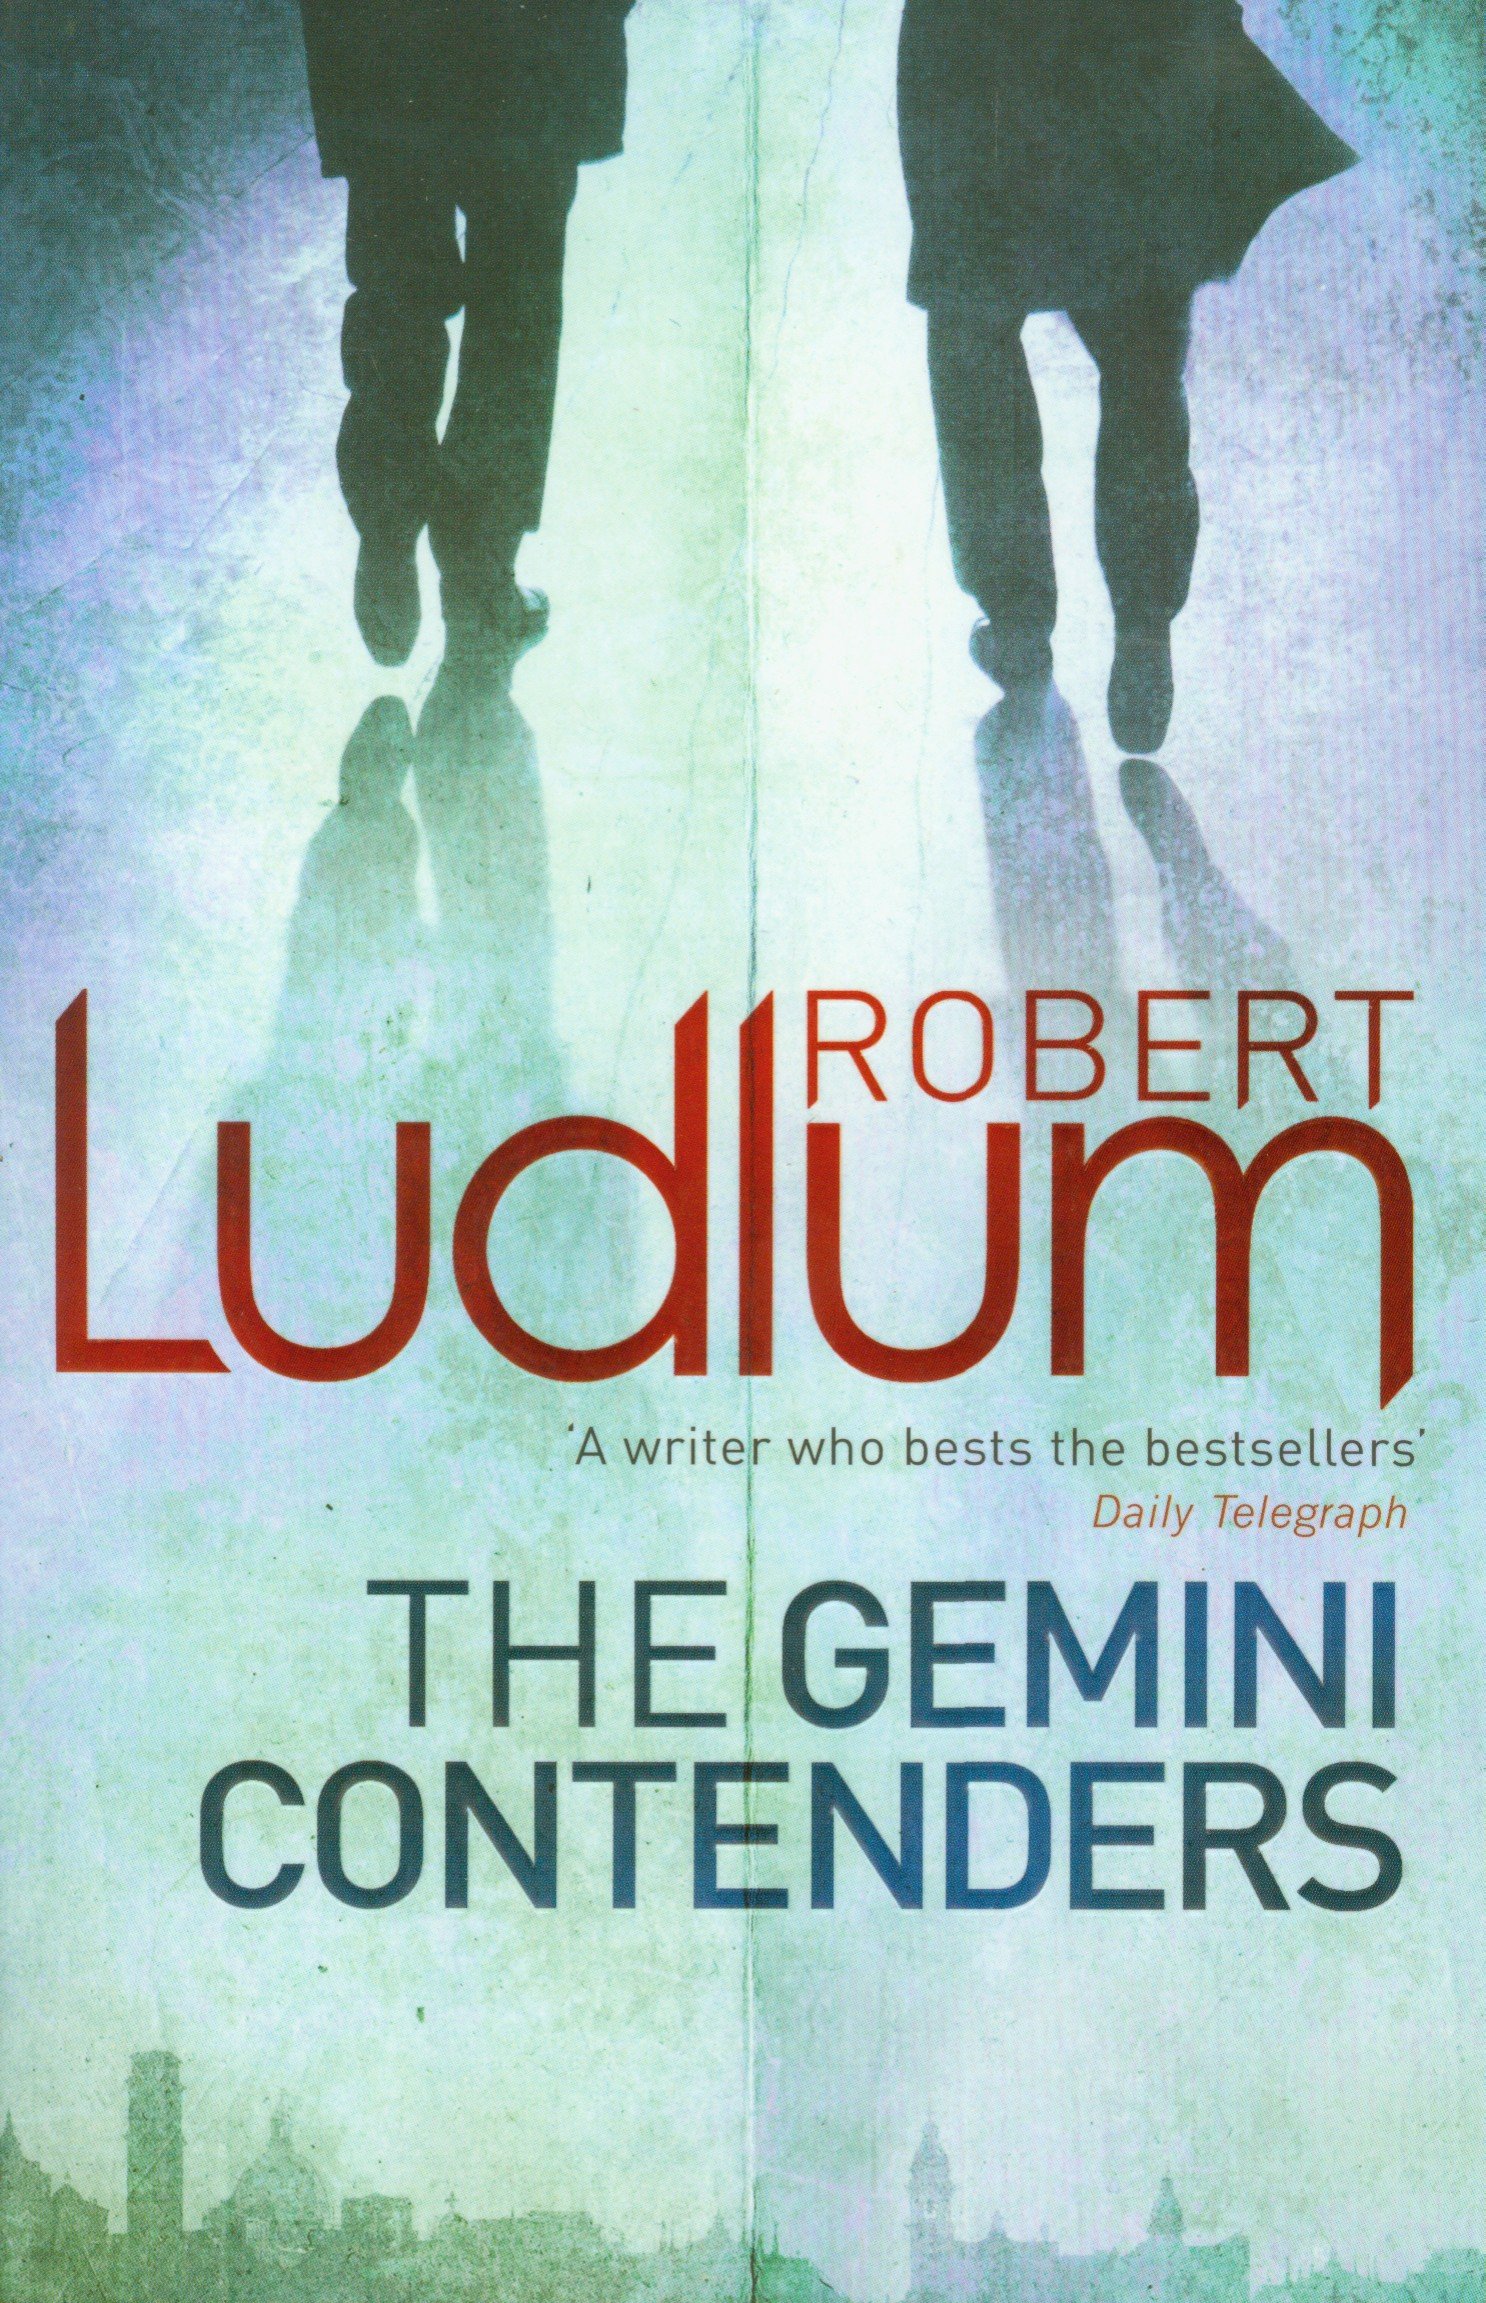 Book Cover of The Gemini Contenders